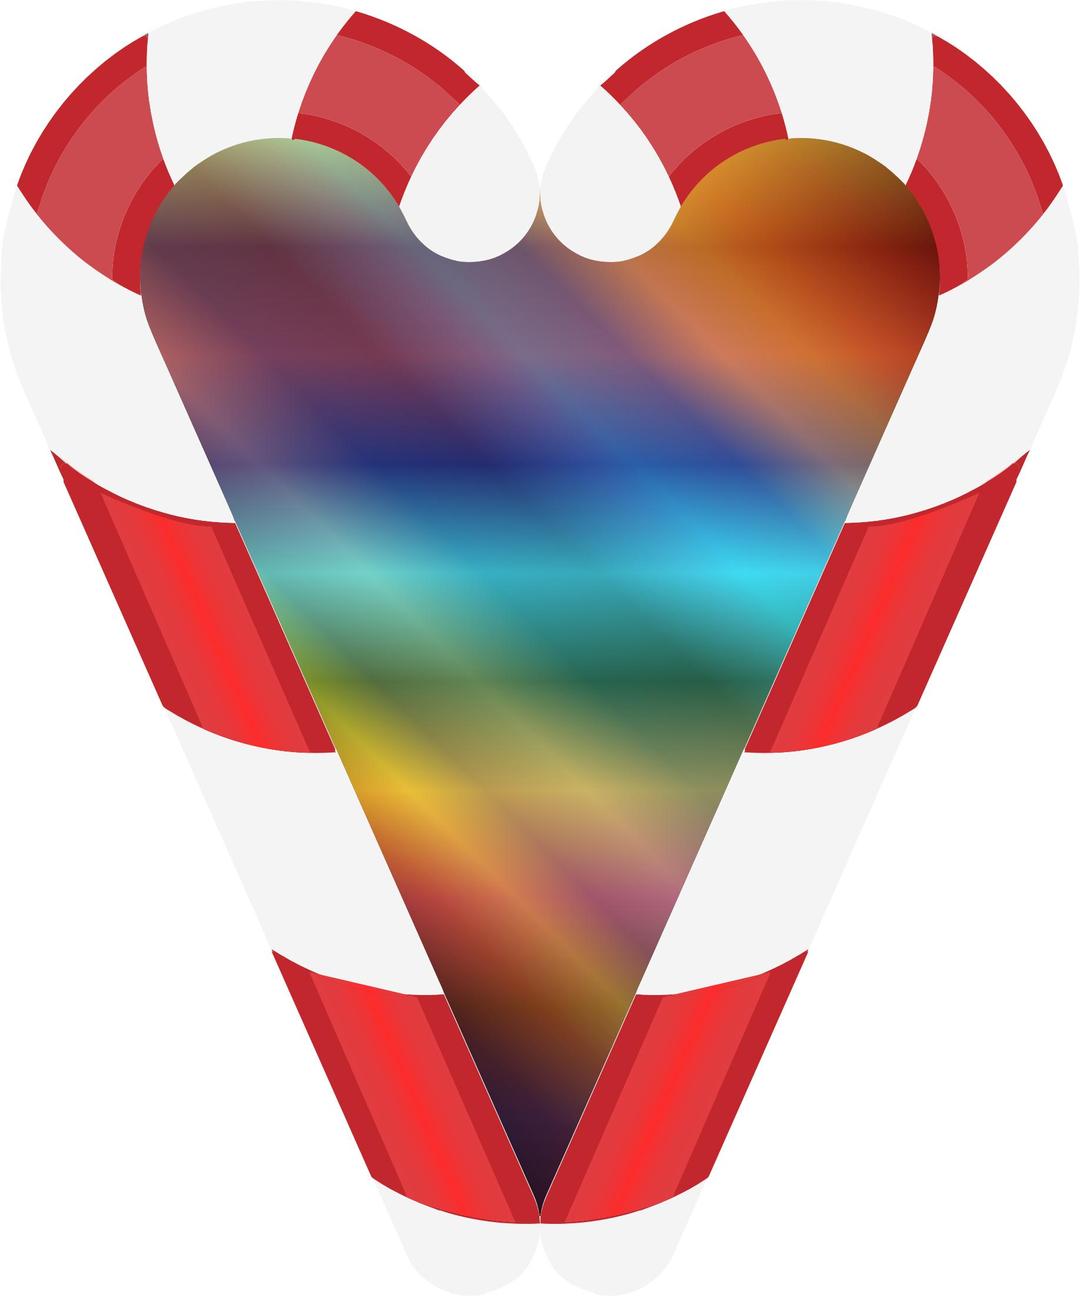 Candy Cane Heart 3 png transparent